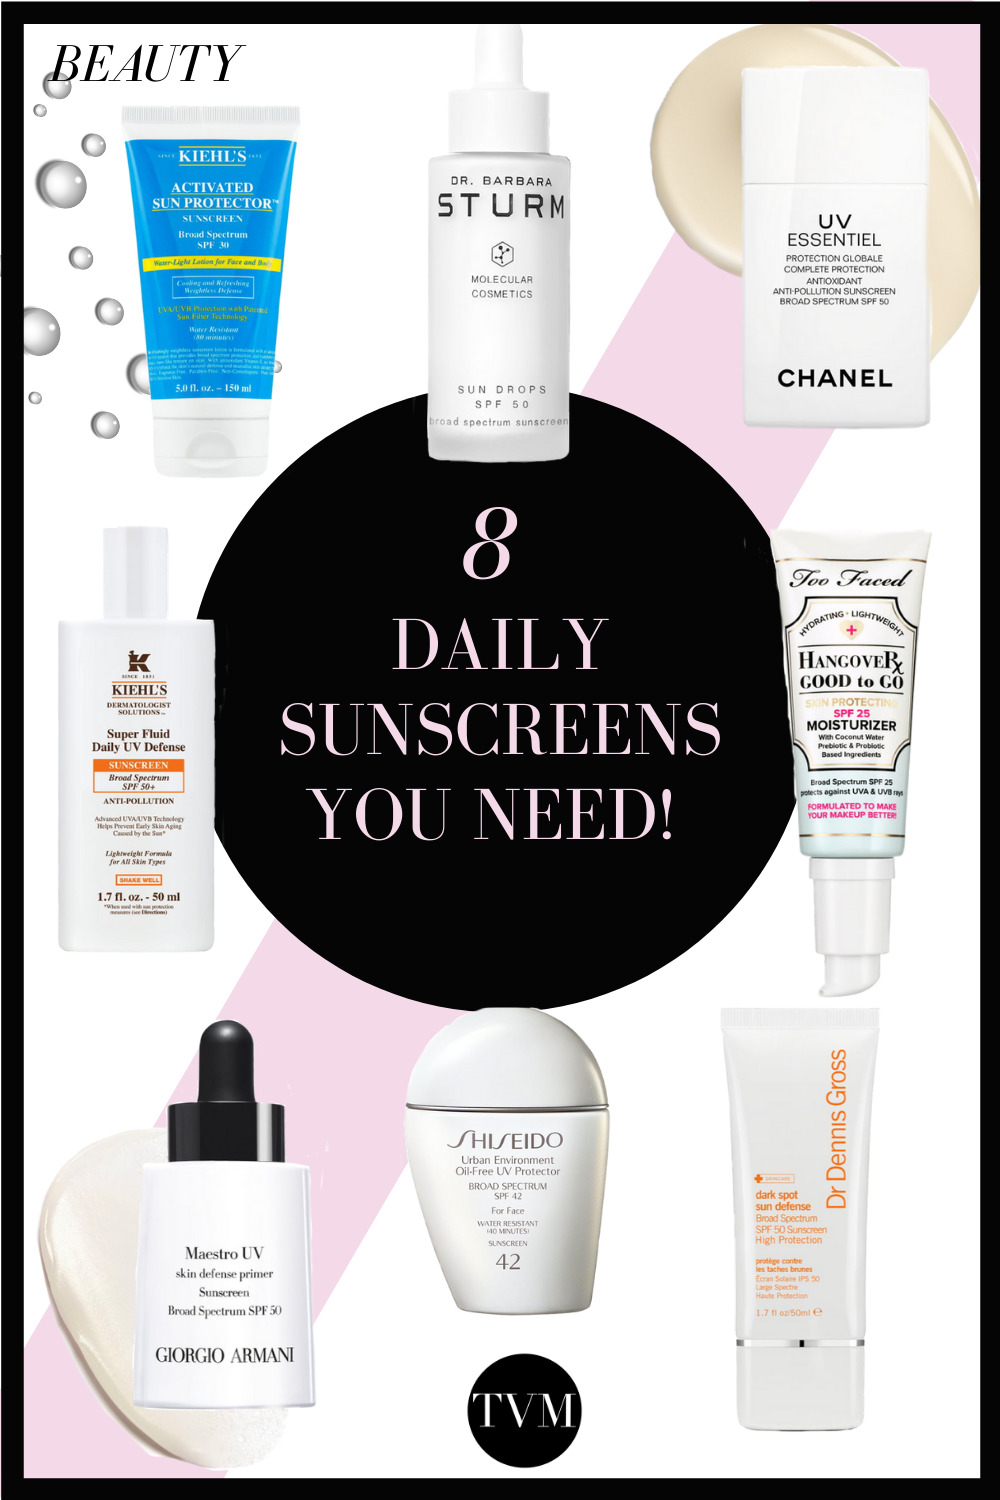 Sunscreen is super important! Do you know that you should use it all year? Here you will find 8 sunscreens to use daily and all year!